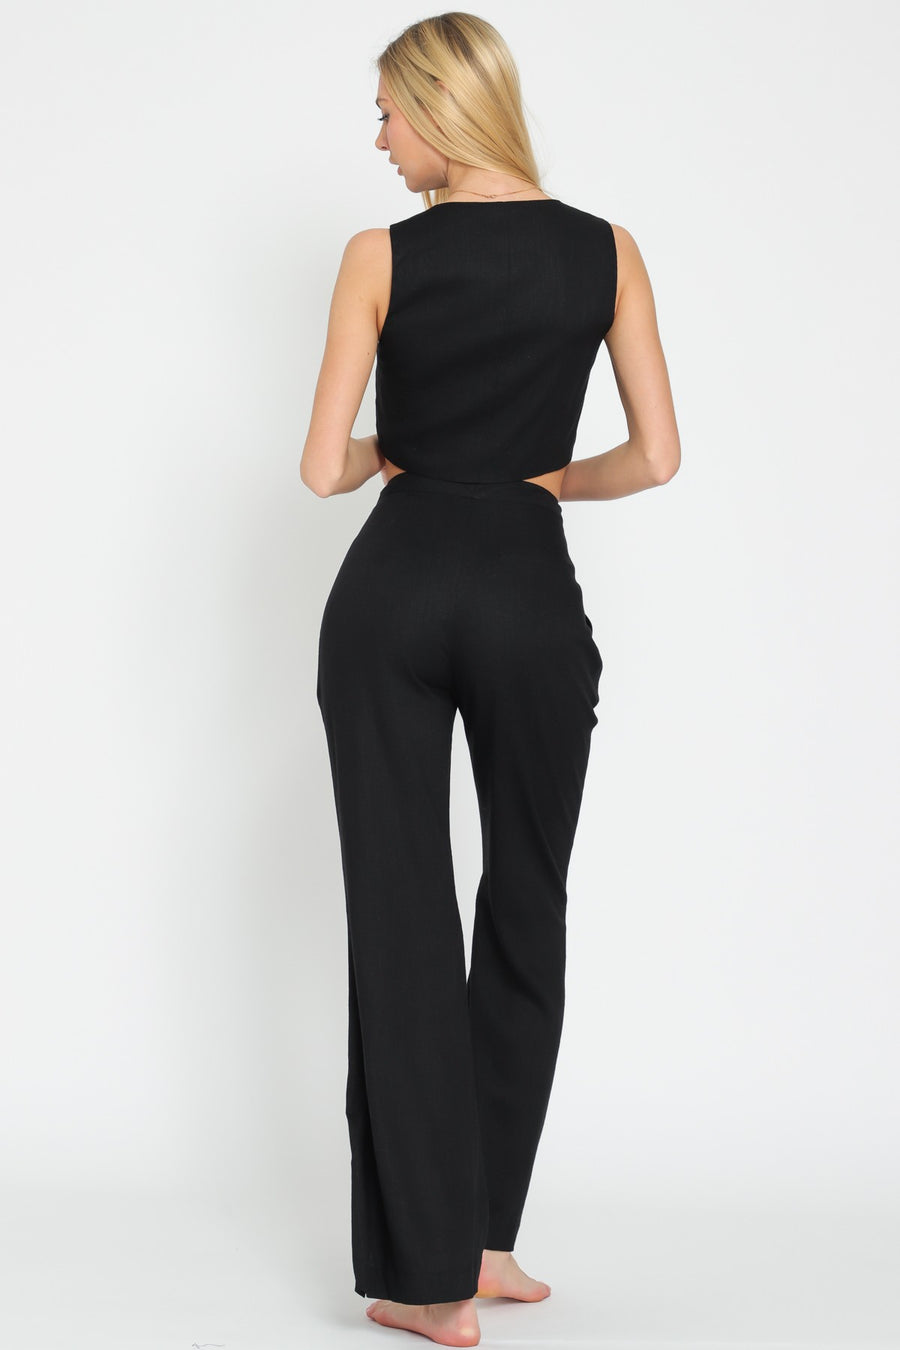 High waisted pants with pockets and button detail.